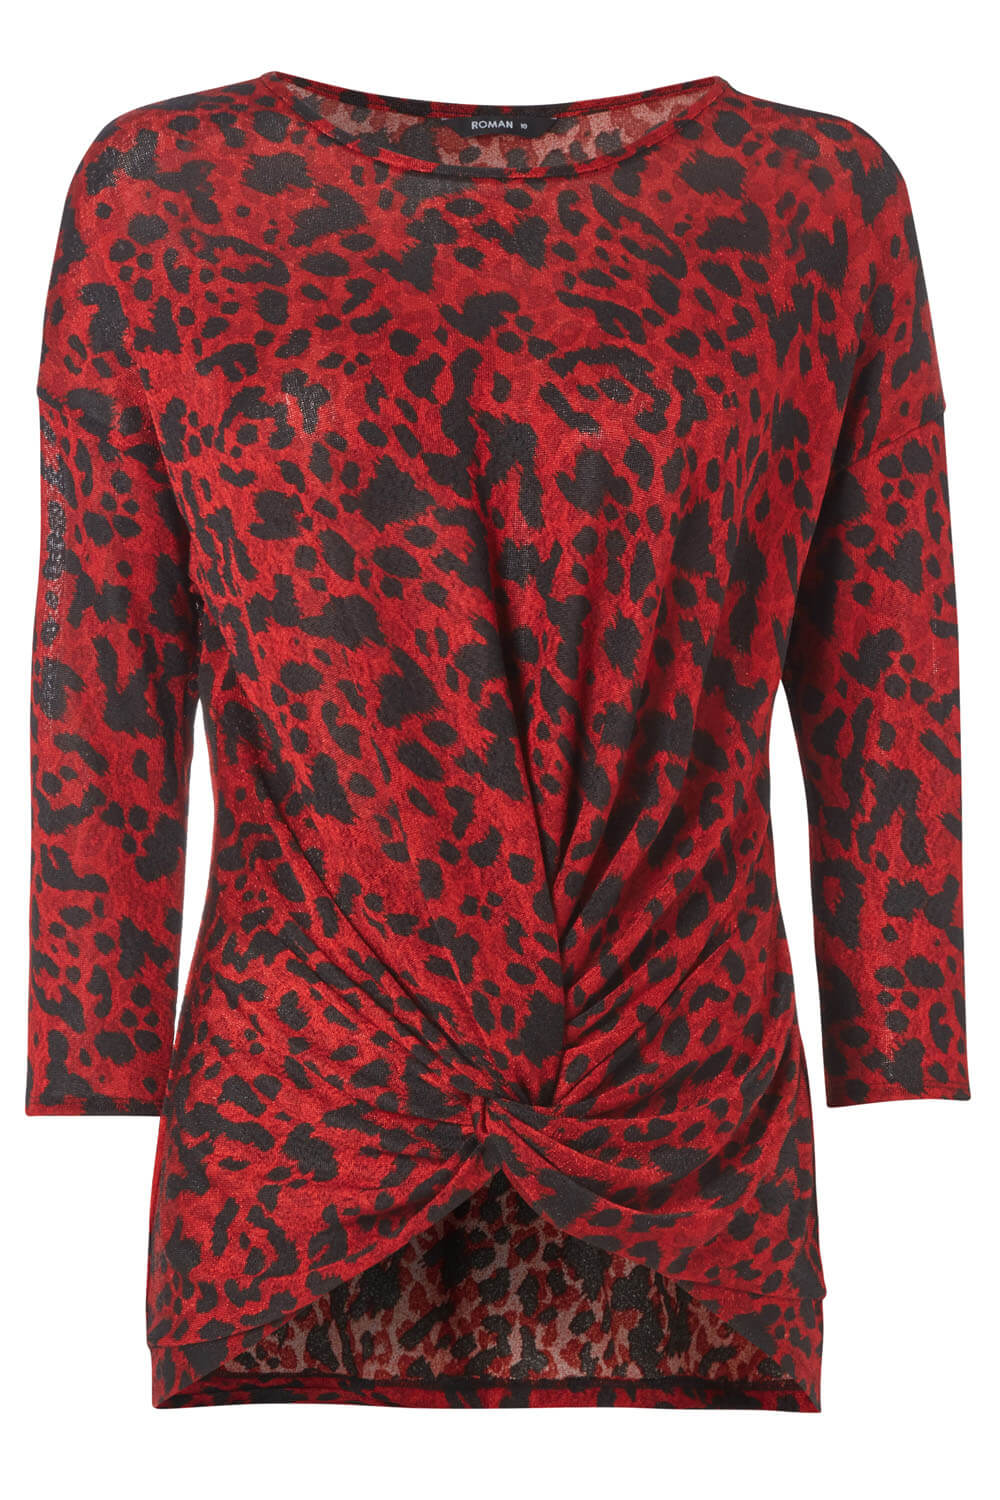 Red Animal Print Twist Front Top, Image 5 of 5